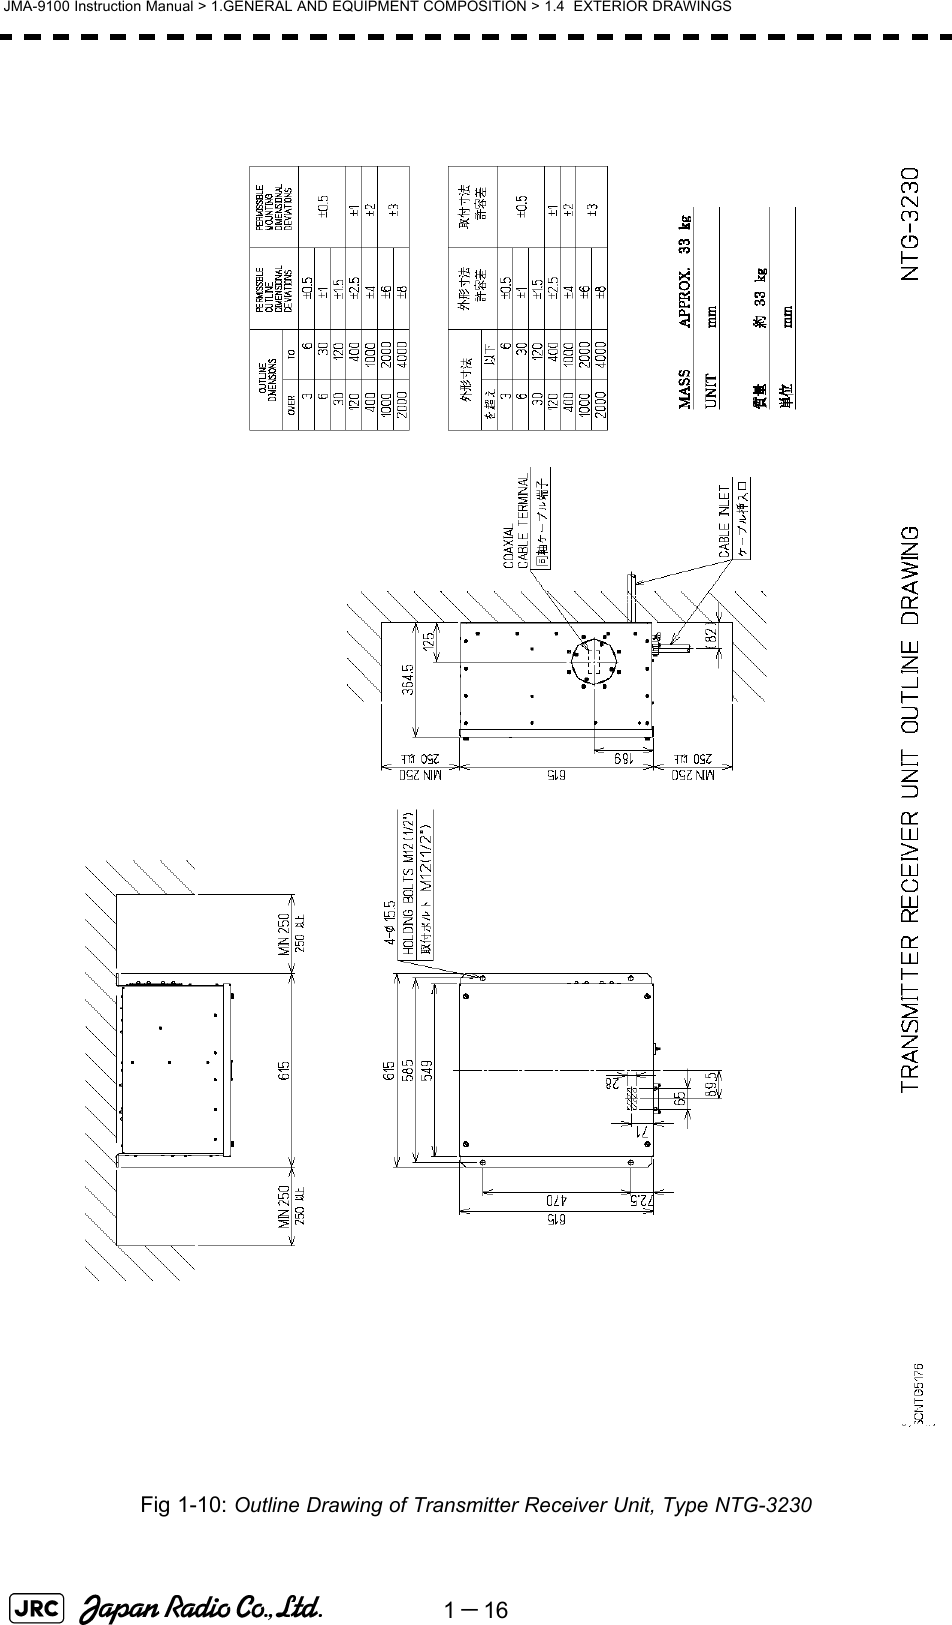 1－16JMA-9100 Instruction Manual &gt; 1.GENERAL AND EQUIPMENT COMPOSITION &gt; 1.4  EXTERIOR DRAWINGSFig 1-10: Outline Drawing of Transmitter Receiver Unit, Type NTG-3230